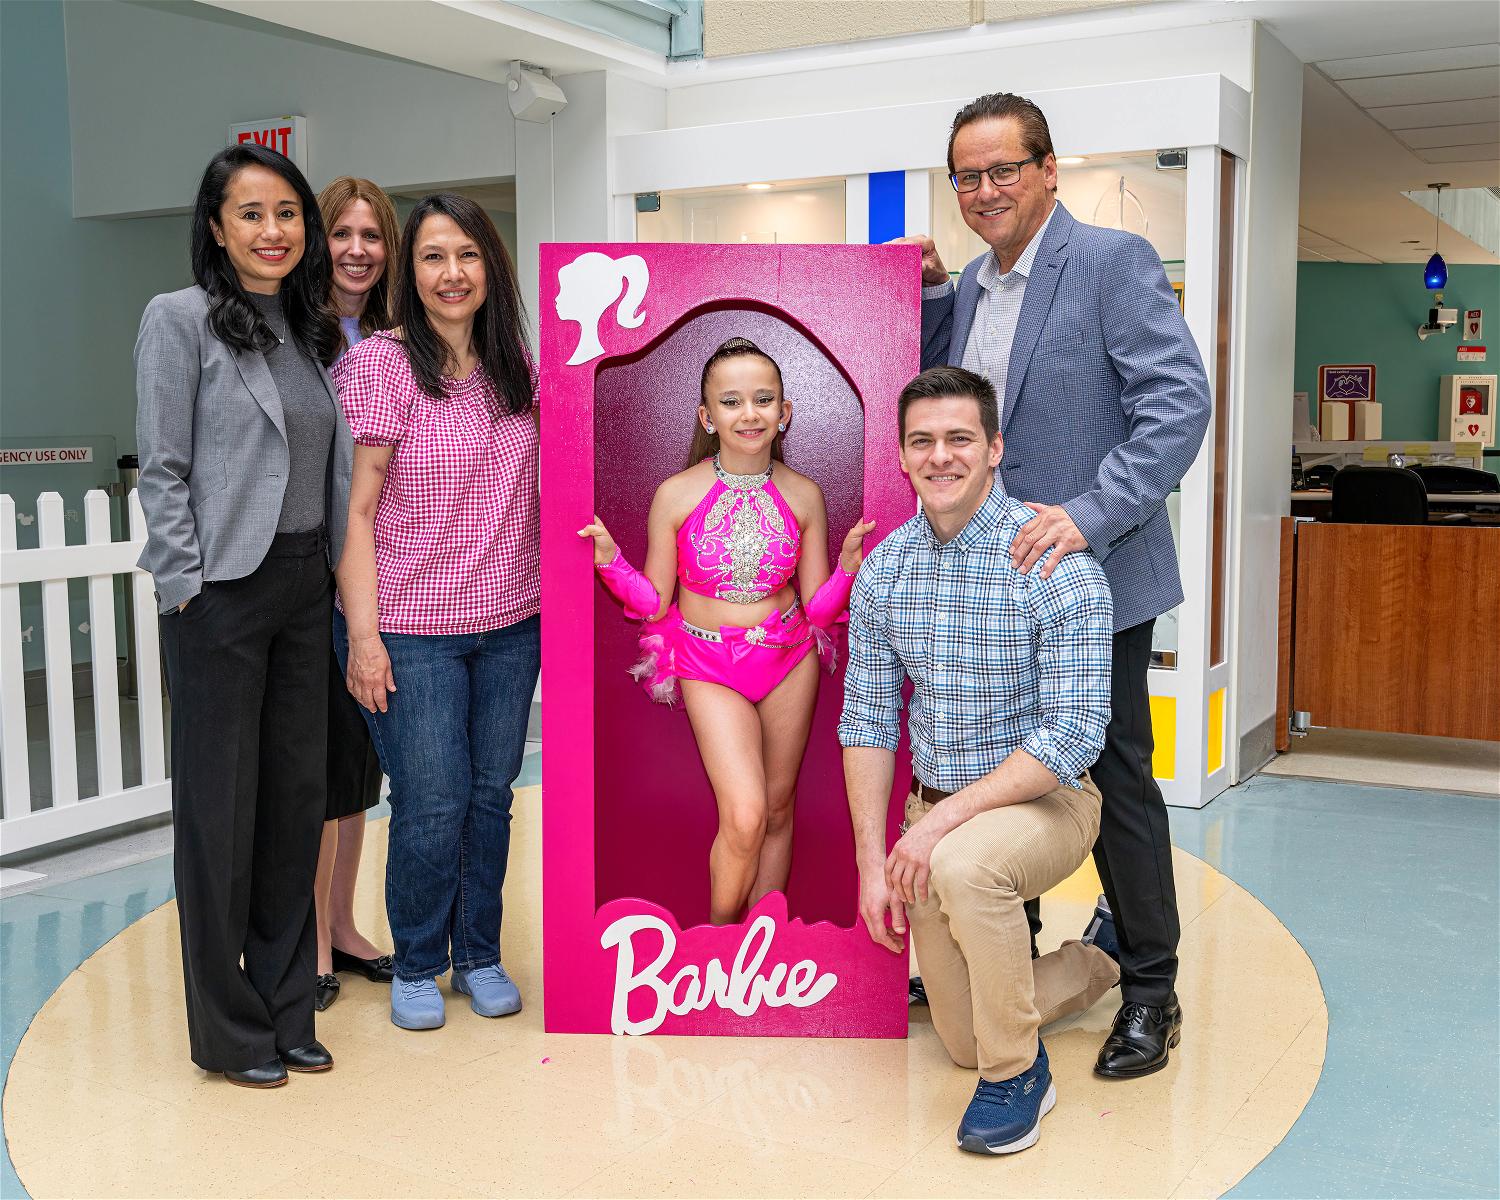 Kidney transplant recipient and 11-year-old Commack resident Emily Alanko with her parents and Cohen Children’s Medical Center doctors. Her older brother (kneeling), a pediatric doctor himself, was Alanko’s kidney donor.